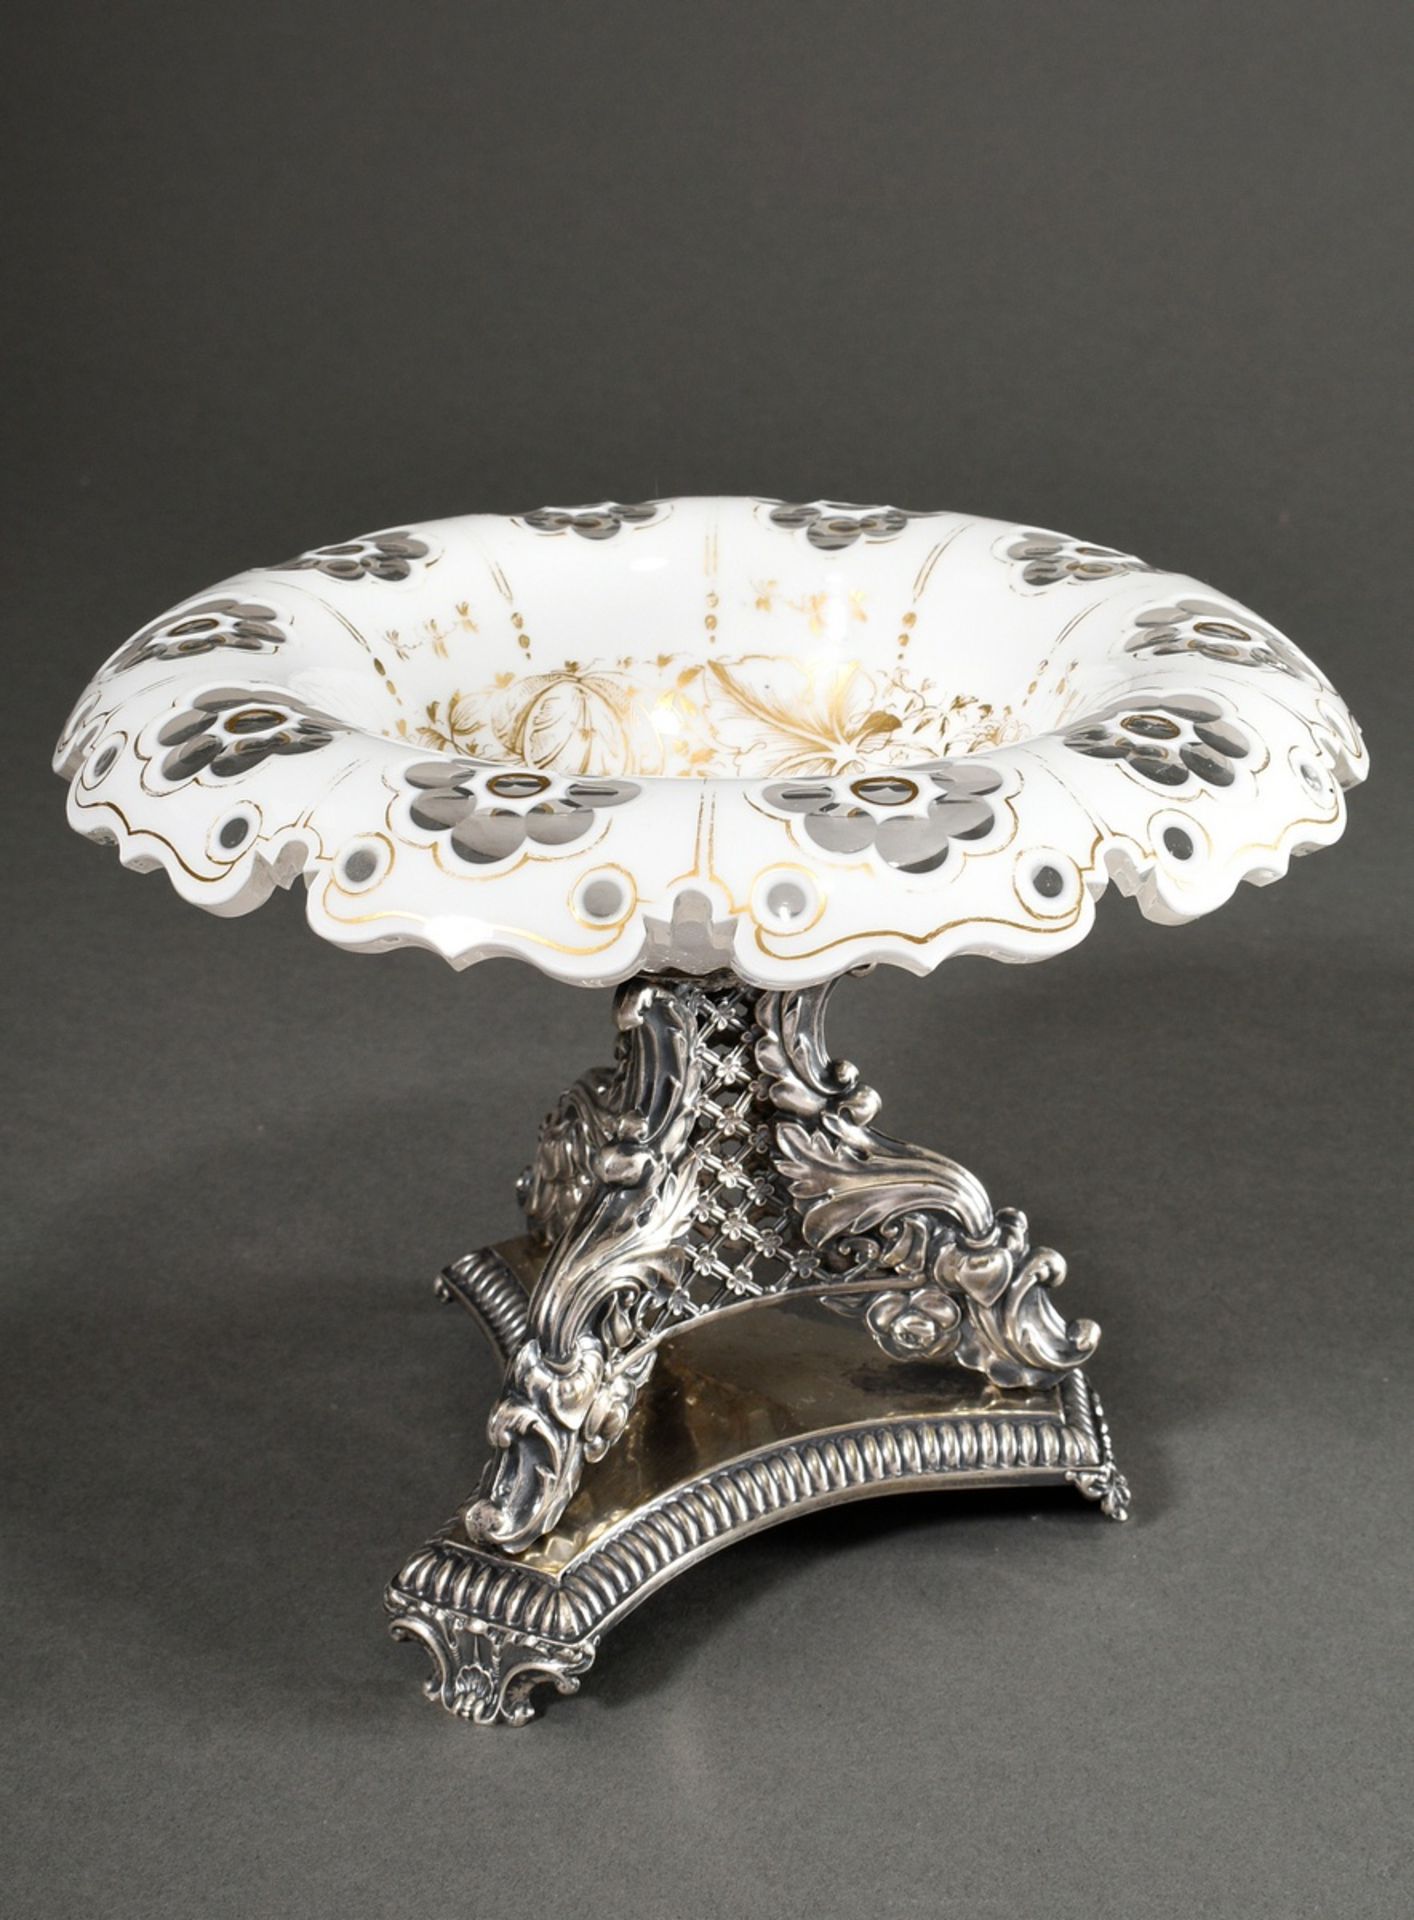 Biedermeier sugar bowl with white overlaid glass and gold staffage on opulently ornamented silver 1